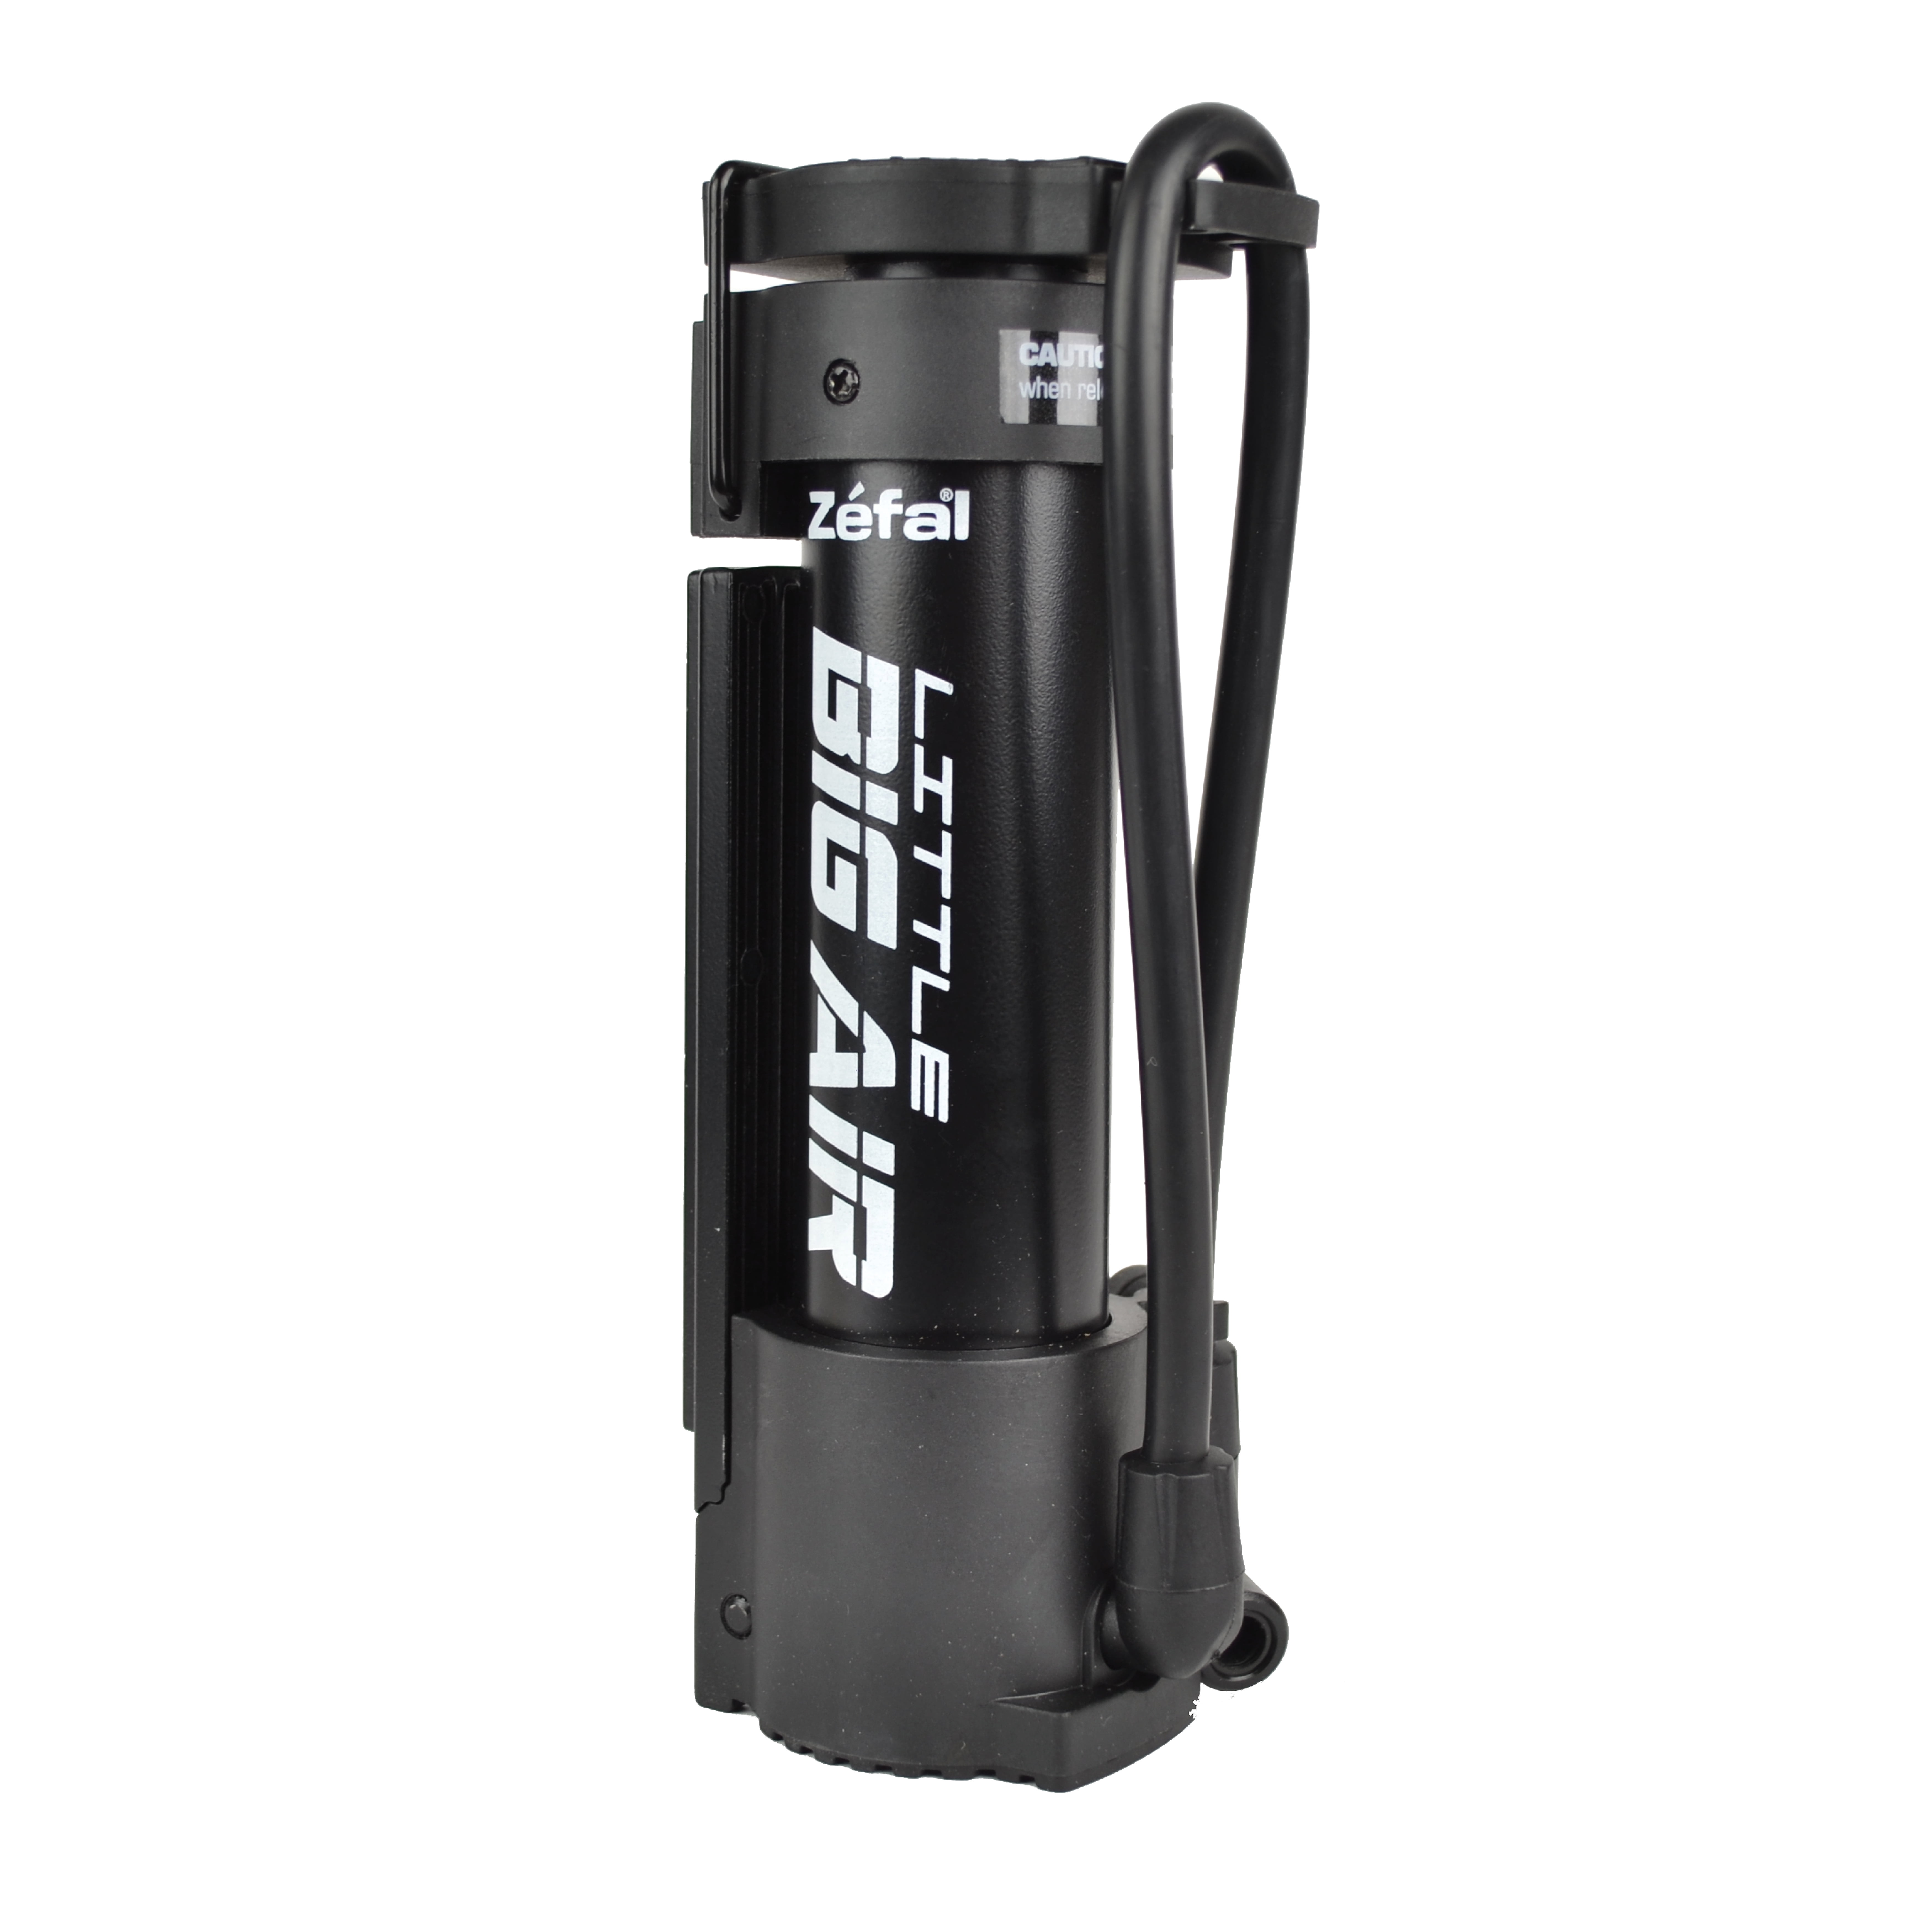 Zefal Little Big Air Universal Foot Floor Pump (Bikes Tires, Balls, Easy to Use, Portable, 80 Psi Capacity)